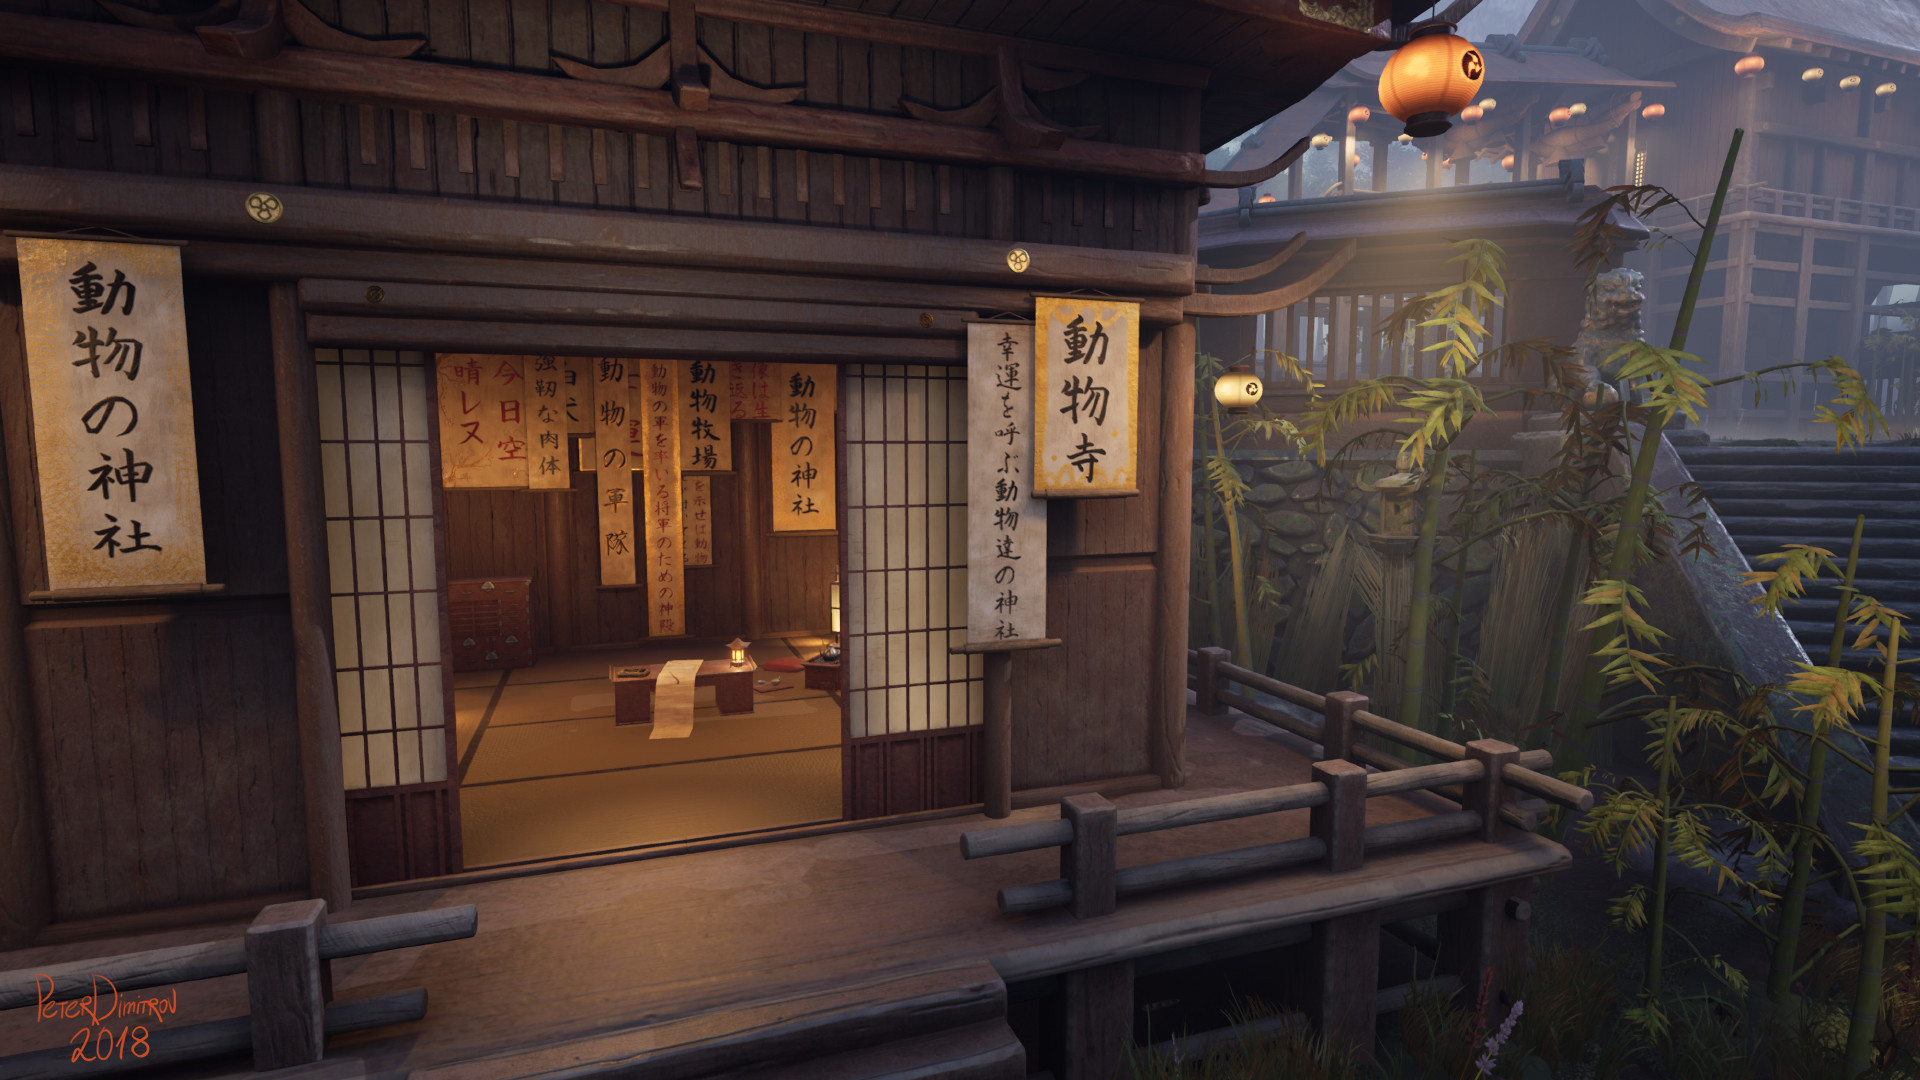 Close up Unreal 4 screenshot of the entrance of the calligraphers hut. To the right one can see the green bamboo props.